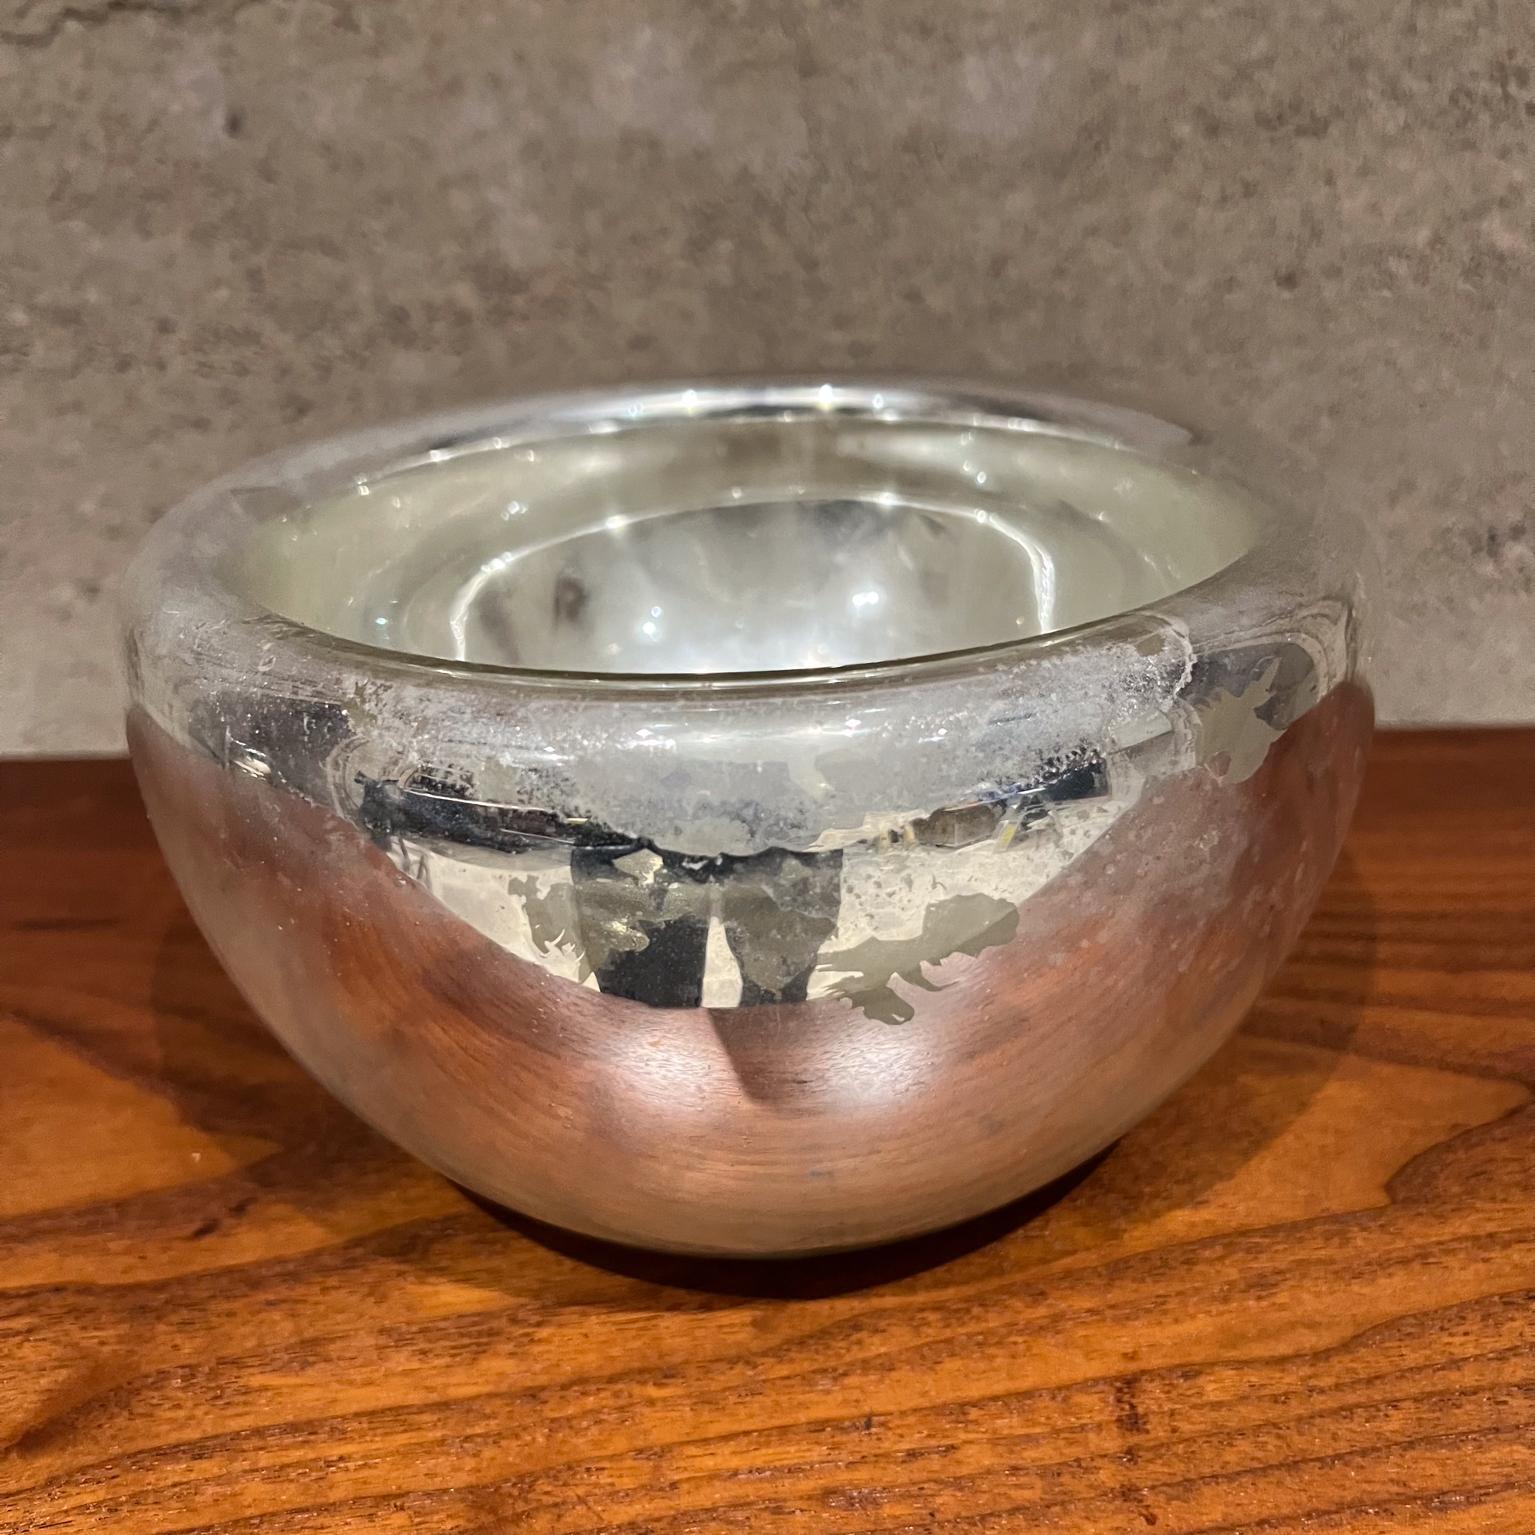 1950s Hand-blown small silver Mercury Glass Bowl Made in Mexico
In the Style of Luis Barragan.
4.5 h x 8 diameter
Preowned vintage condition
Plenty of wear faded areas. Original with great character.
Please refer to all images.